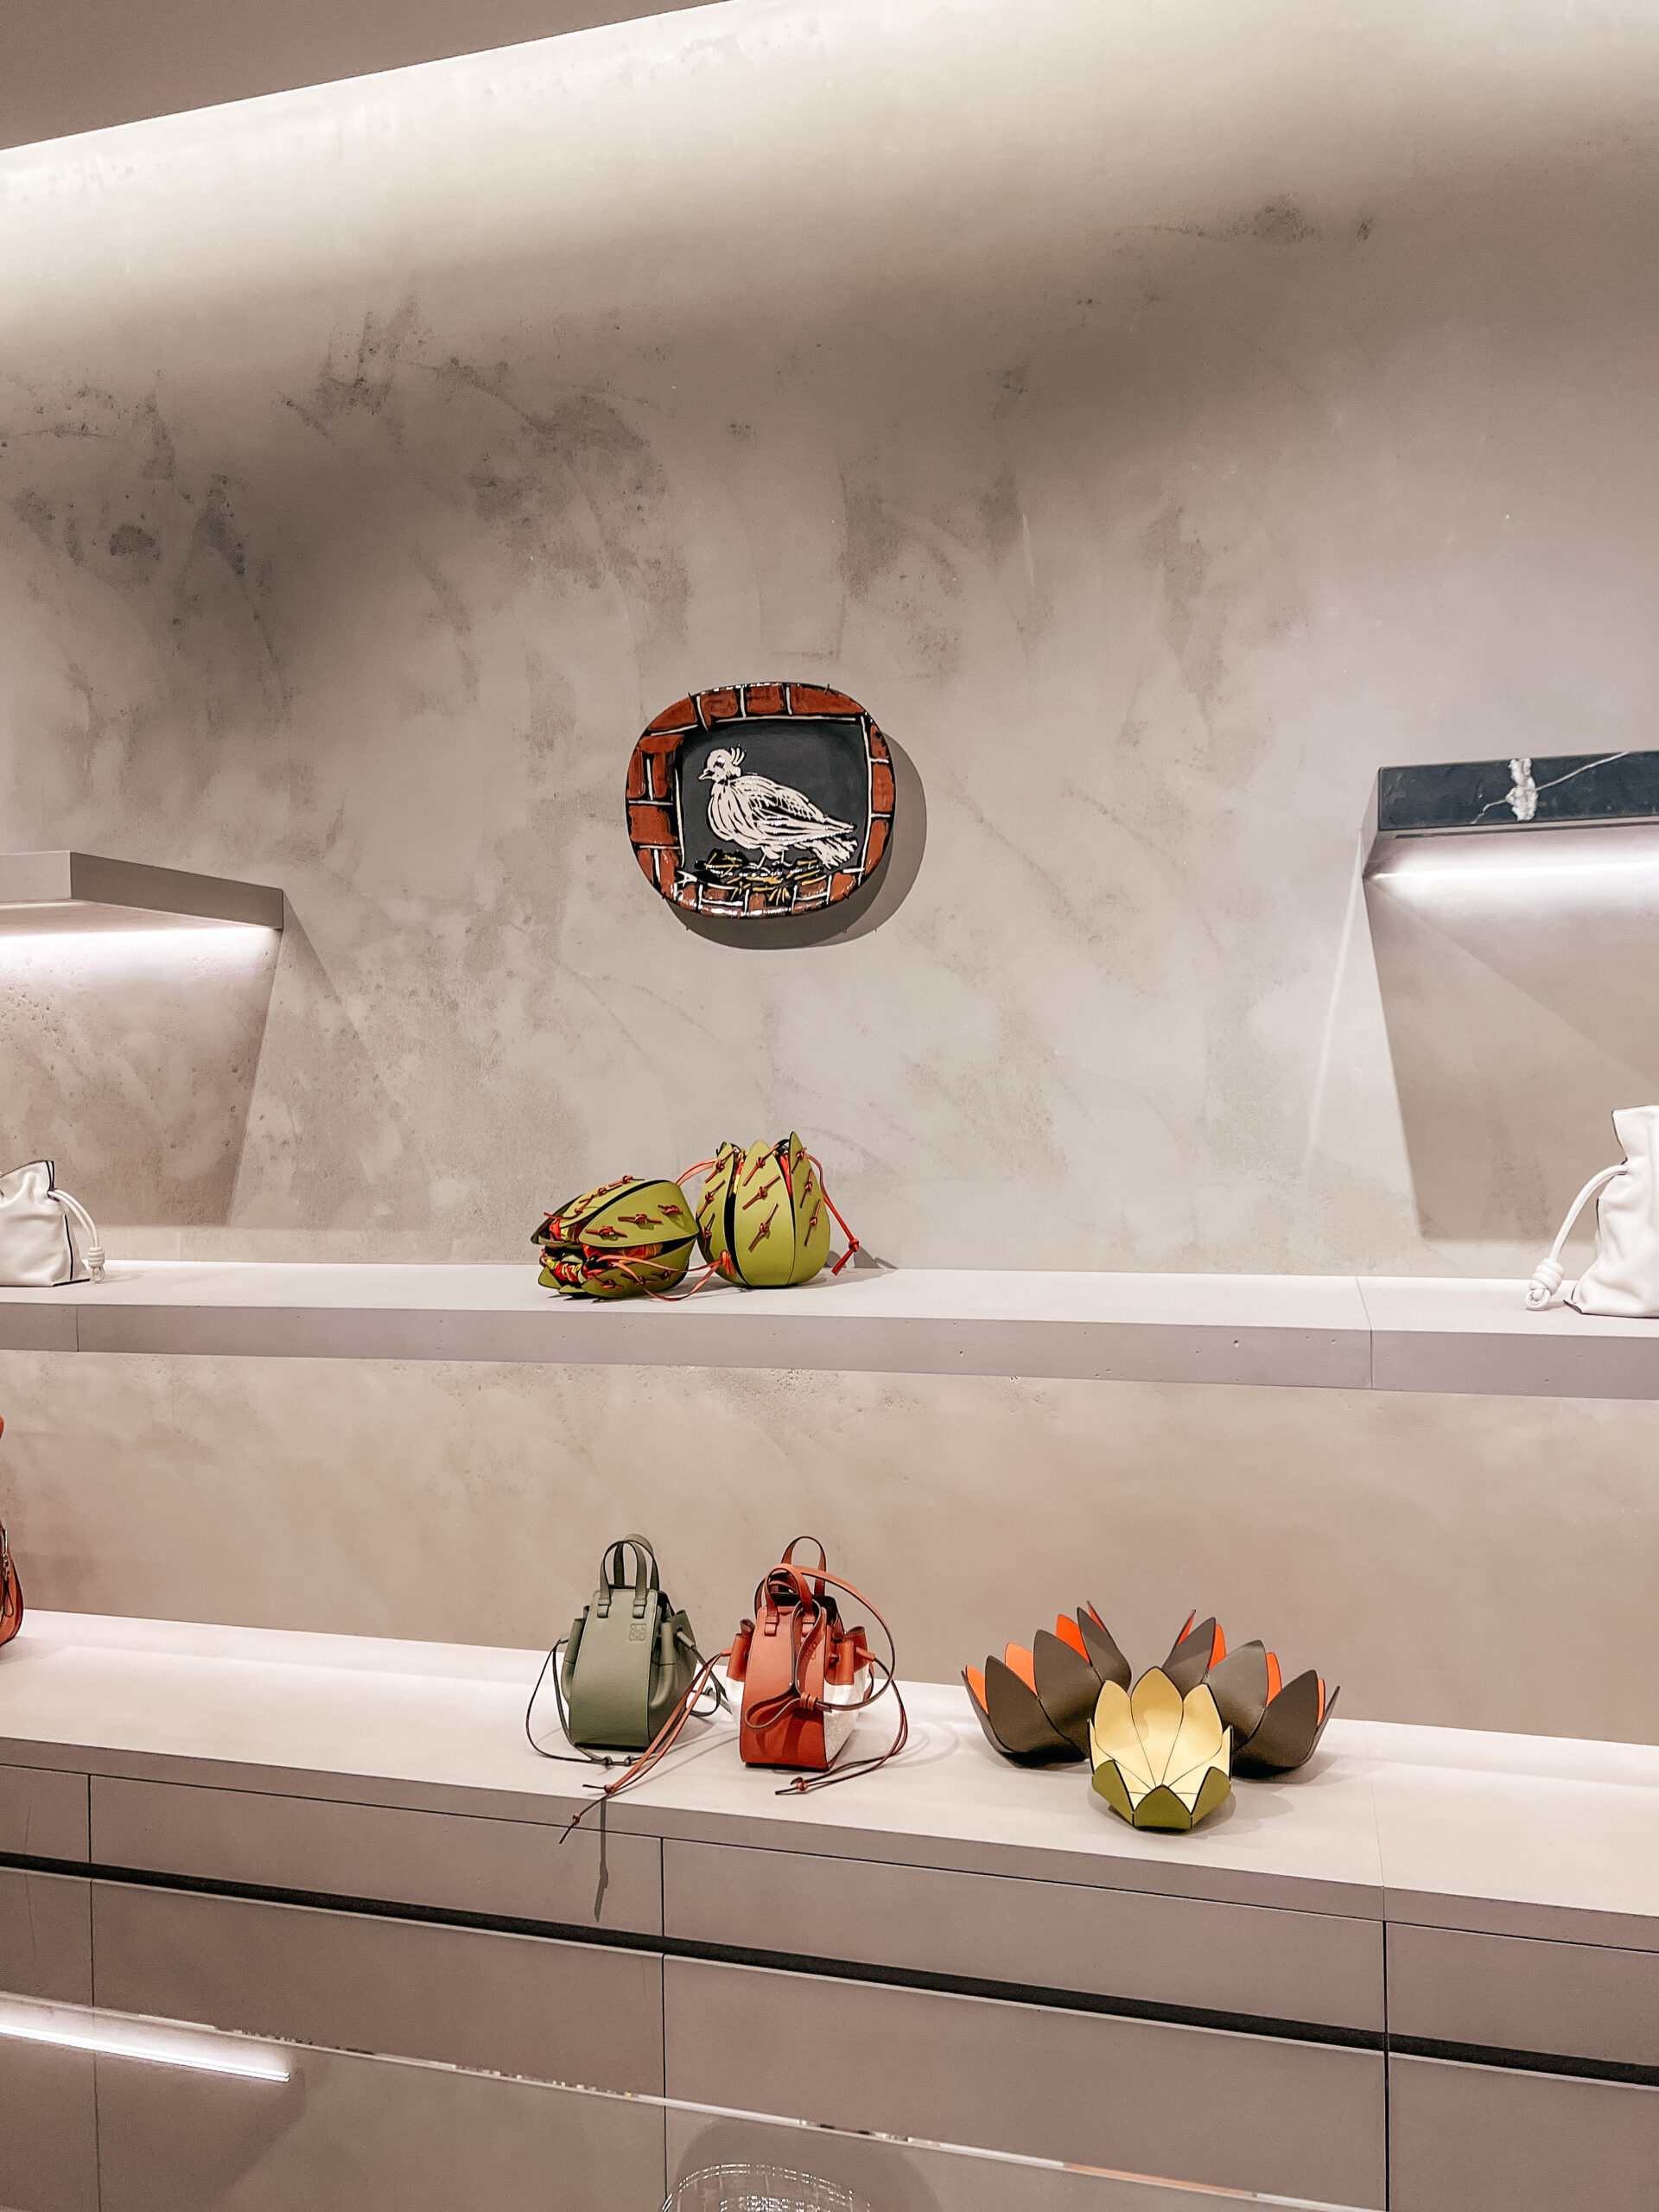 picasso pottery on the wall with Loewe leather goods on shelves around it